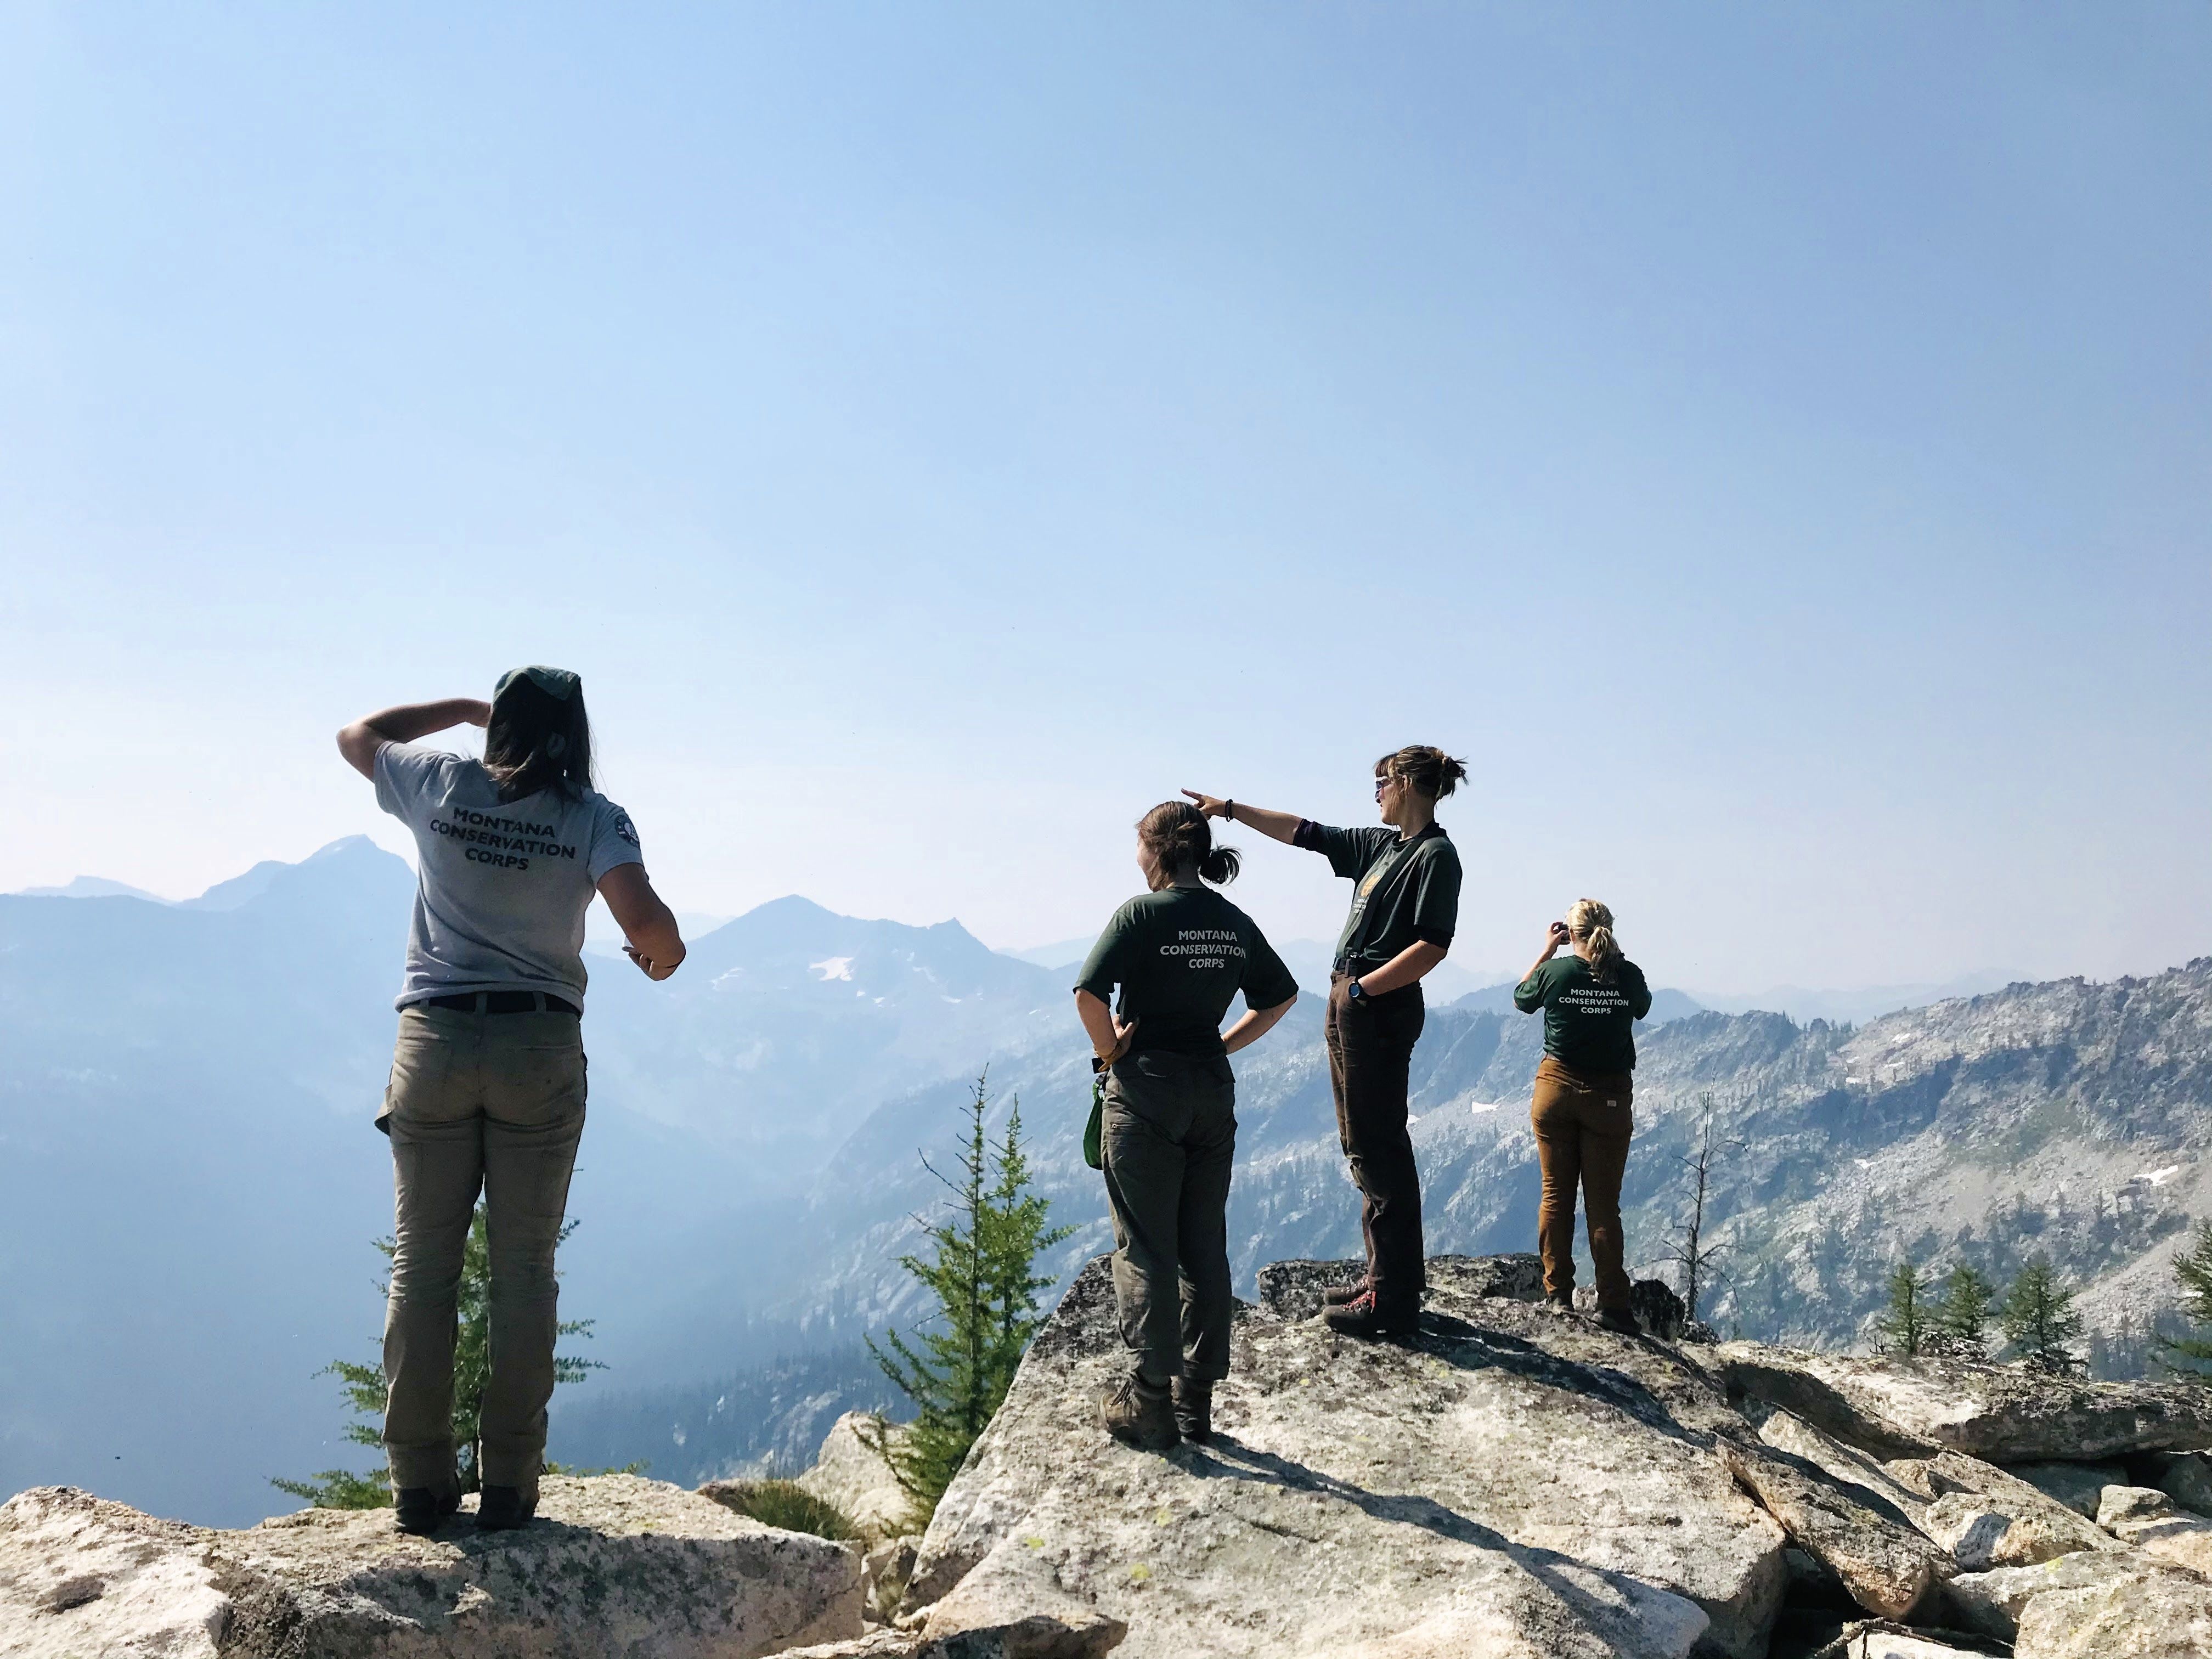 [Image Description: Four MCC members standing on a rock, looking out in the distance at the mountain ranges ahead of them. On the far right, one member is taking a photo.]